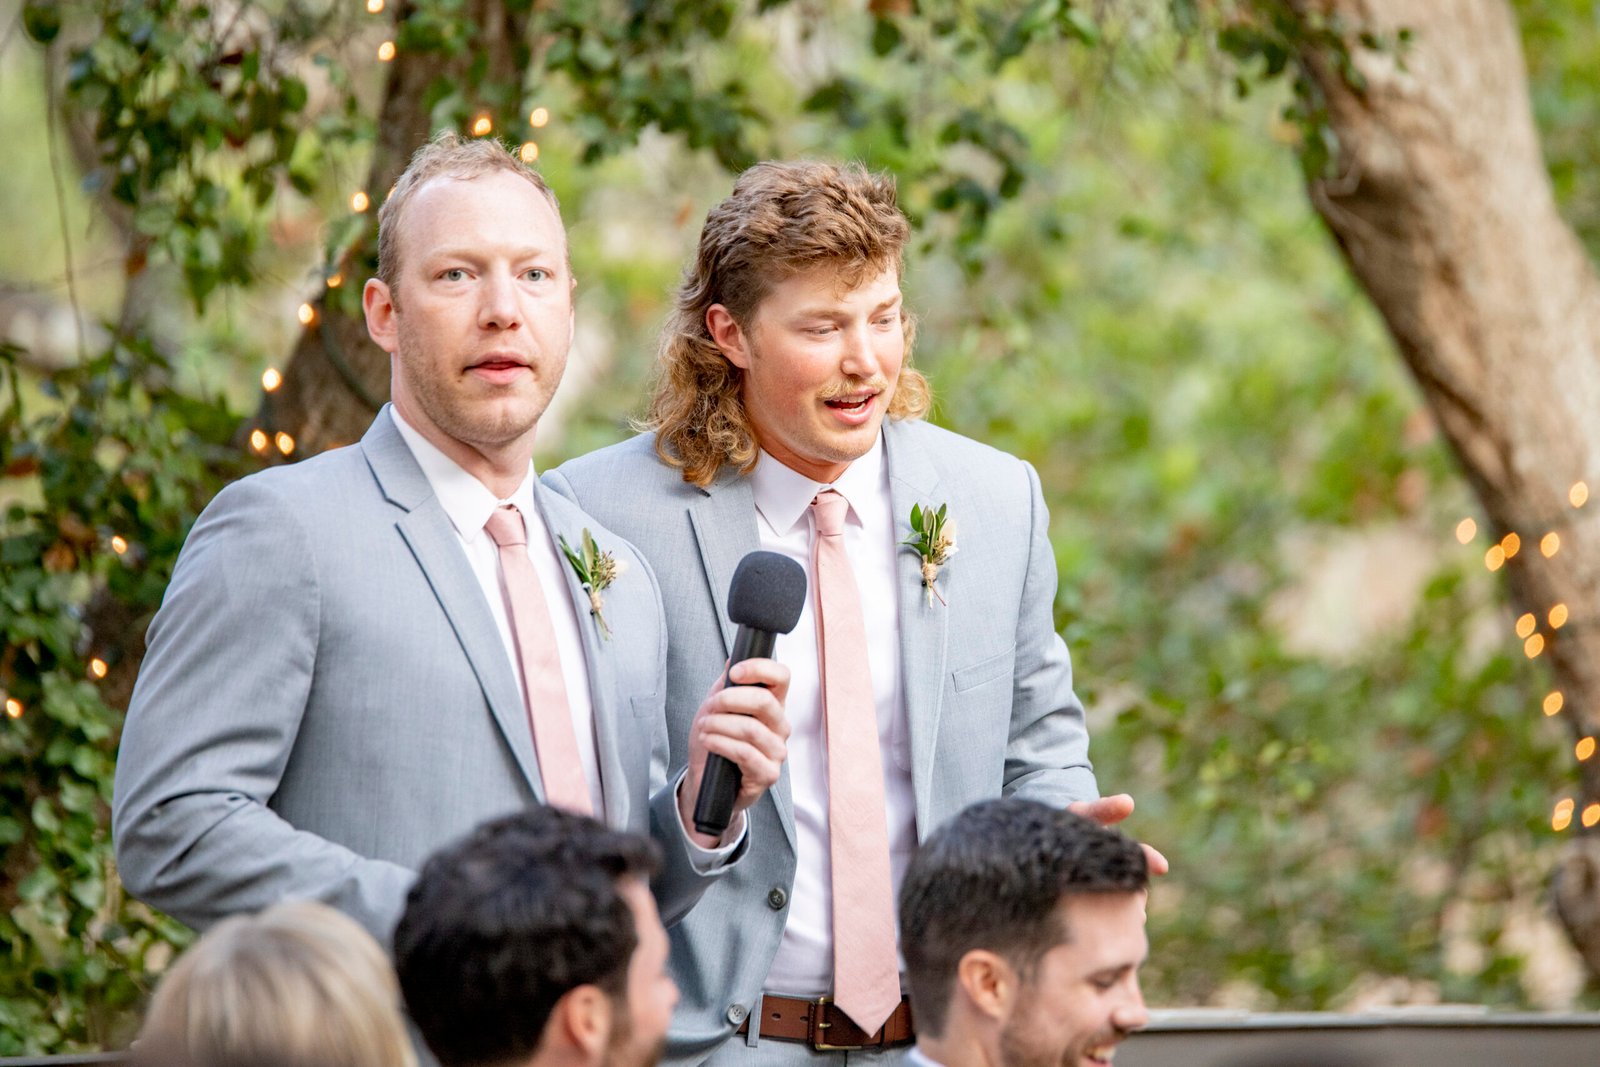 brothers giving a speech at a wedding